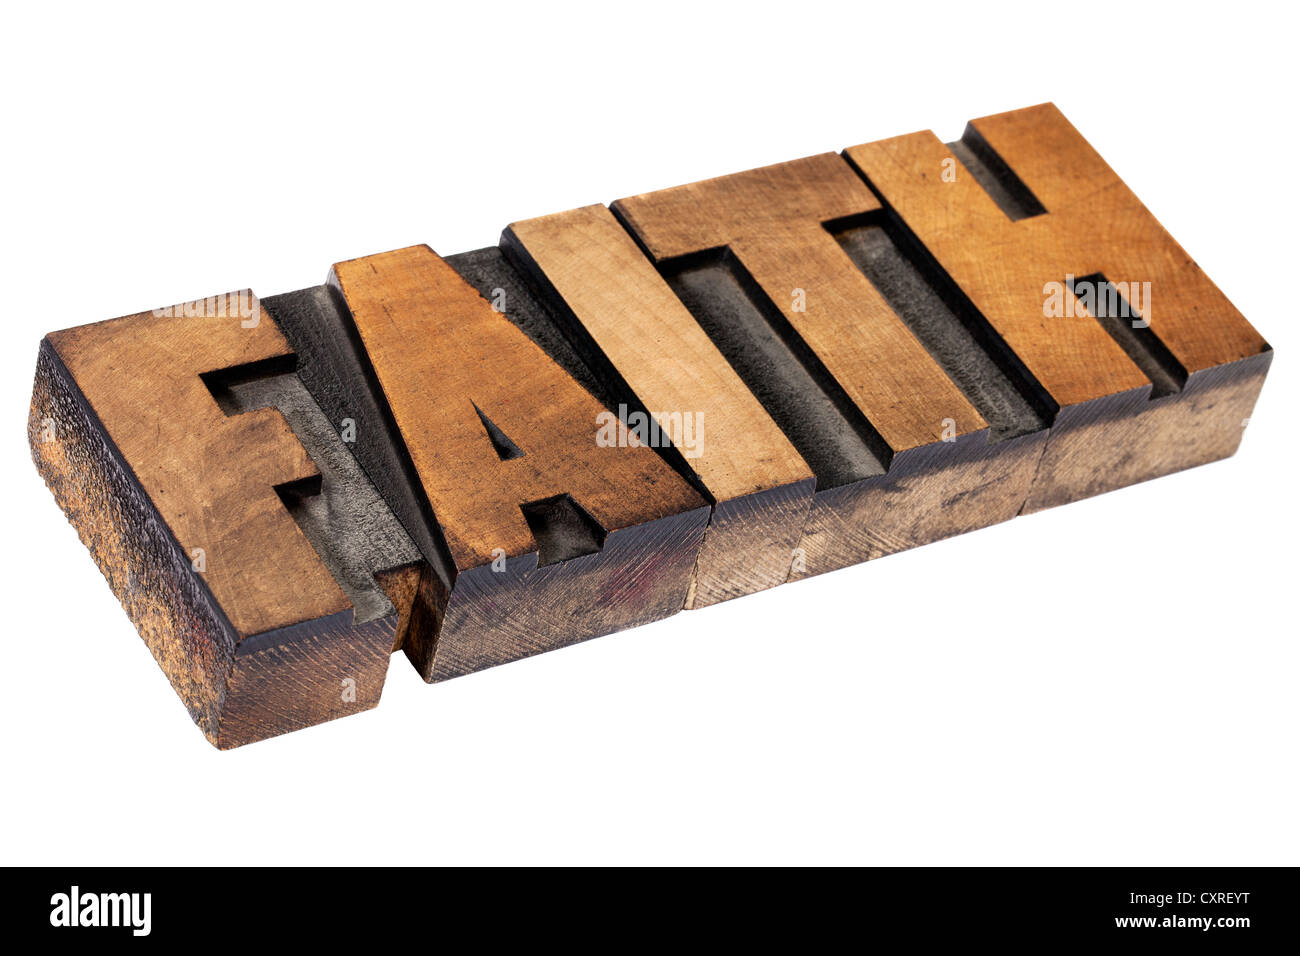 faith - isolated text in vintage letterpress wood type printing blocks Stock Photo